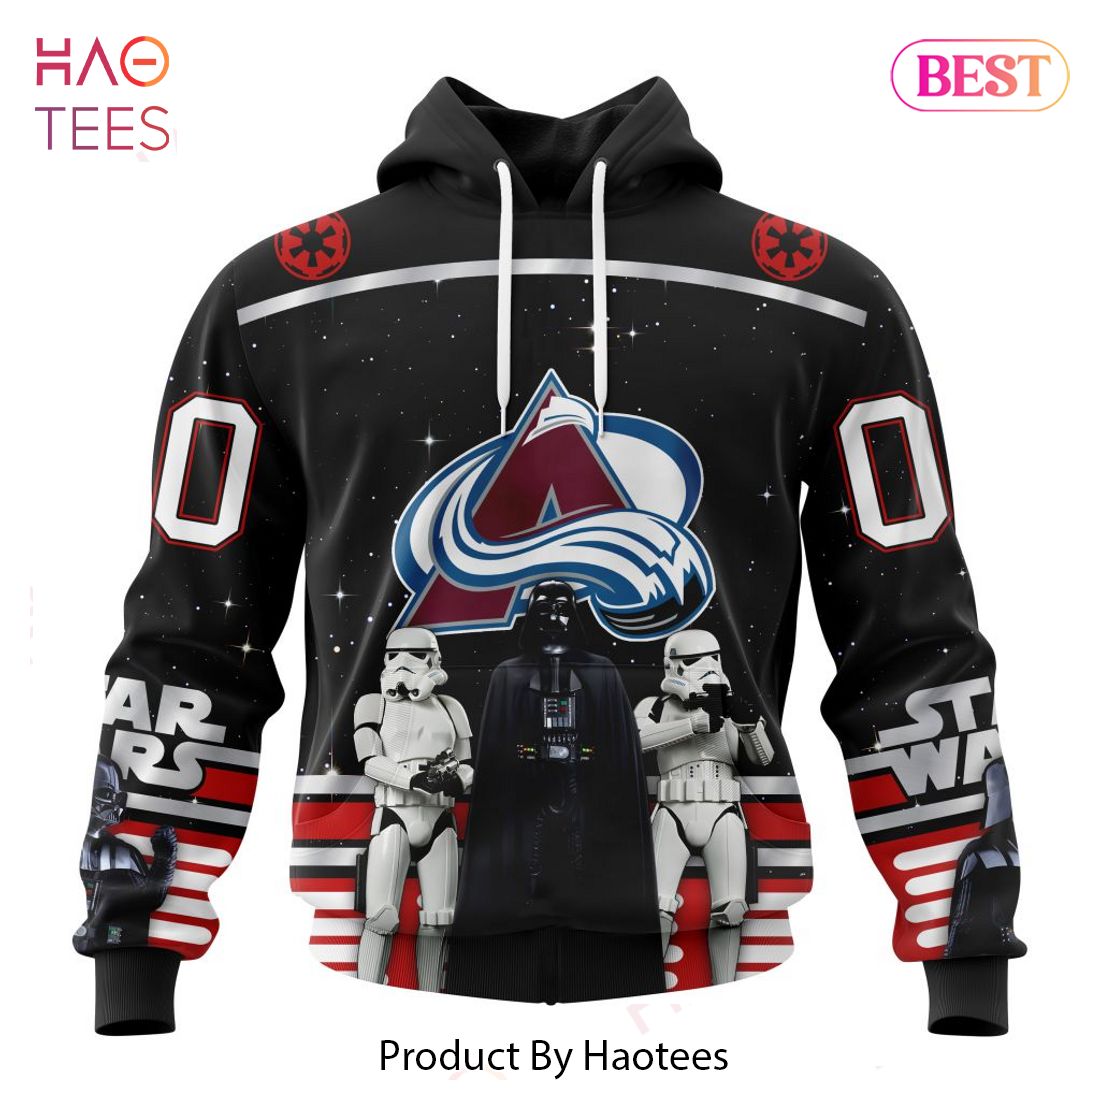 BEST NHL Colorado Avalanche Special Star Wars Design May The 4th Be With You 3D Hoodie